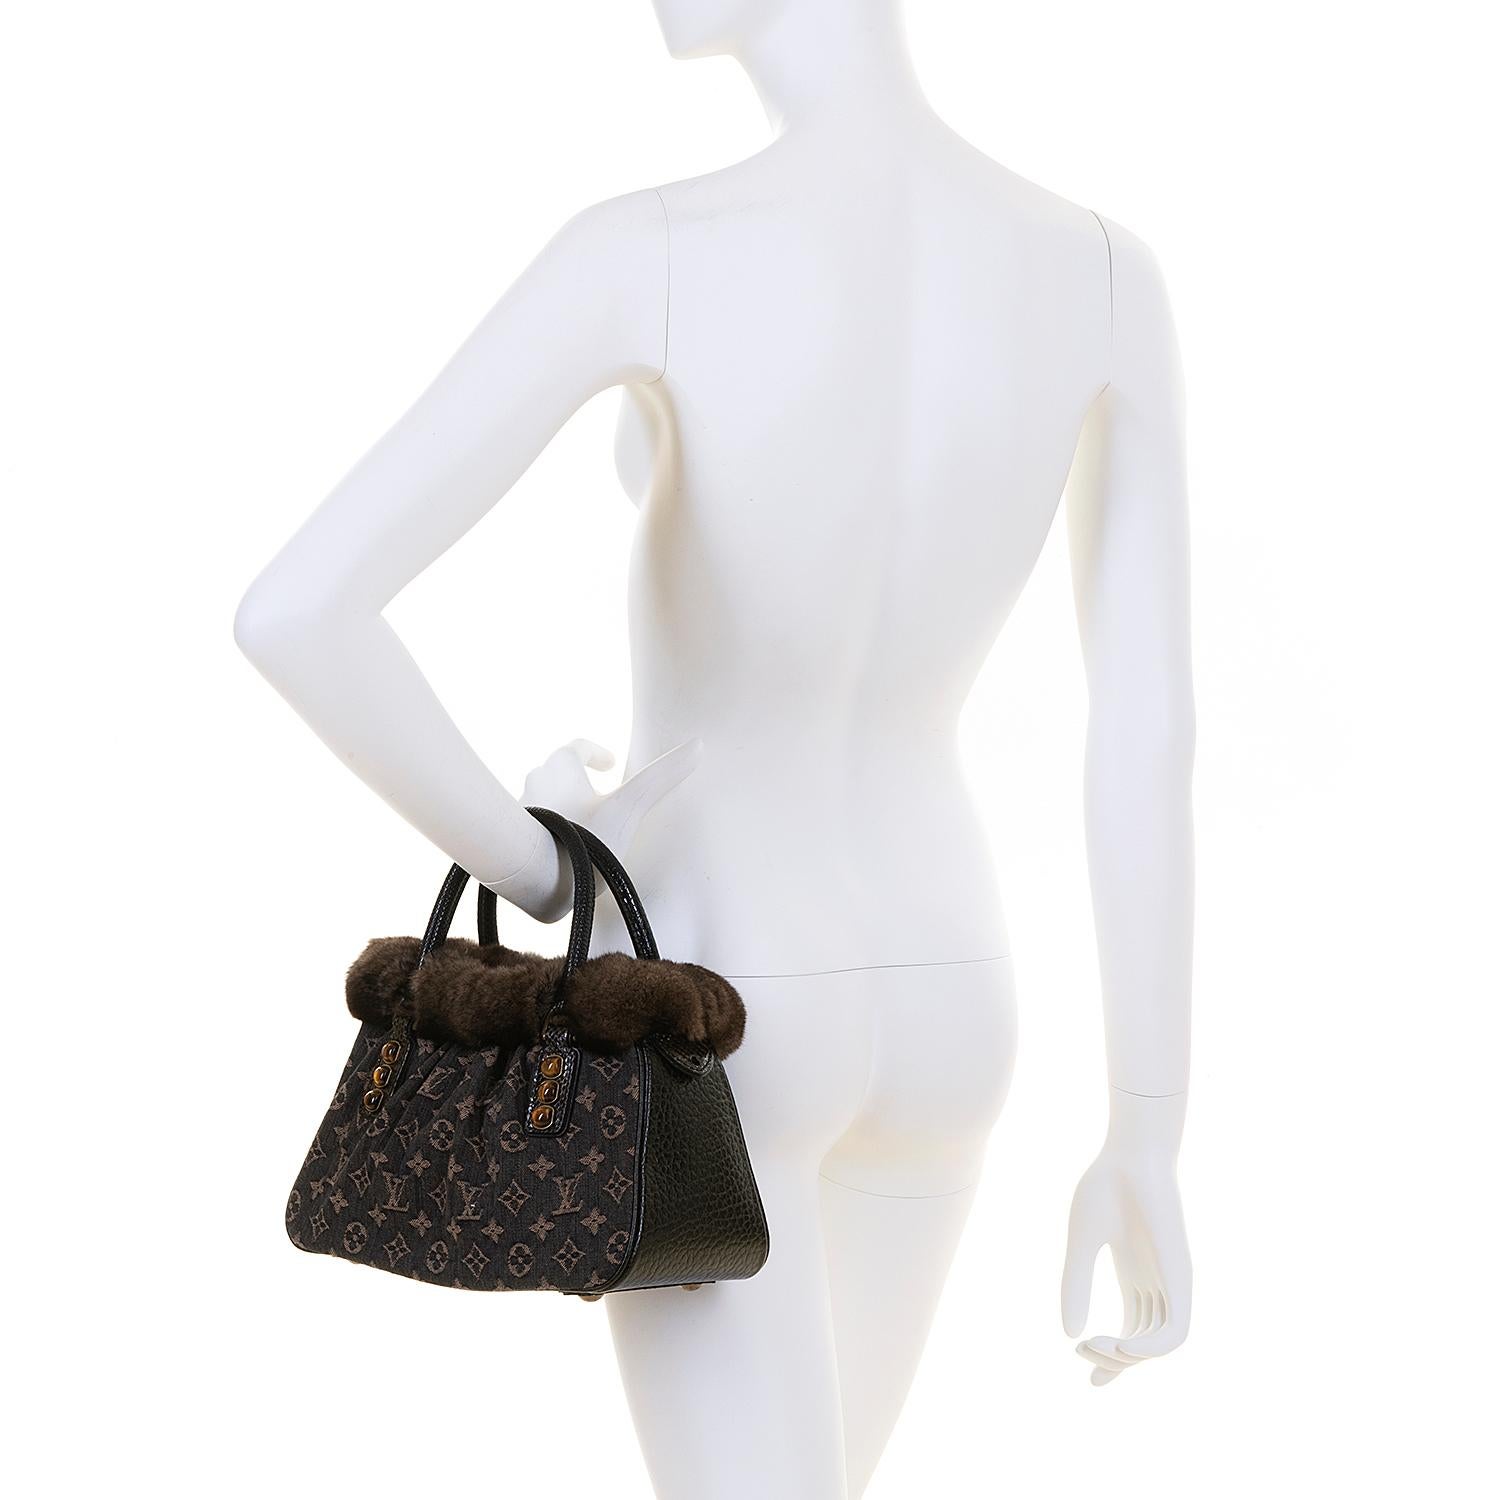 This 'Tres Chic' Unique 30cm Runway Bag by Louis Vuitton is the epitome of luxury. From their Autumn/winter 2005/2006 Collection, 'Sac Trapeze' has the main body of the bag finished in grained leather, with the sides in L.V. monogrammed toile denim,